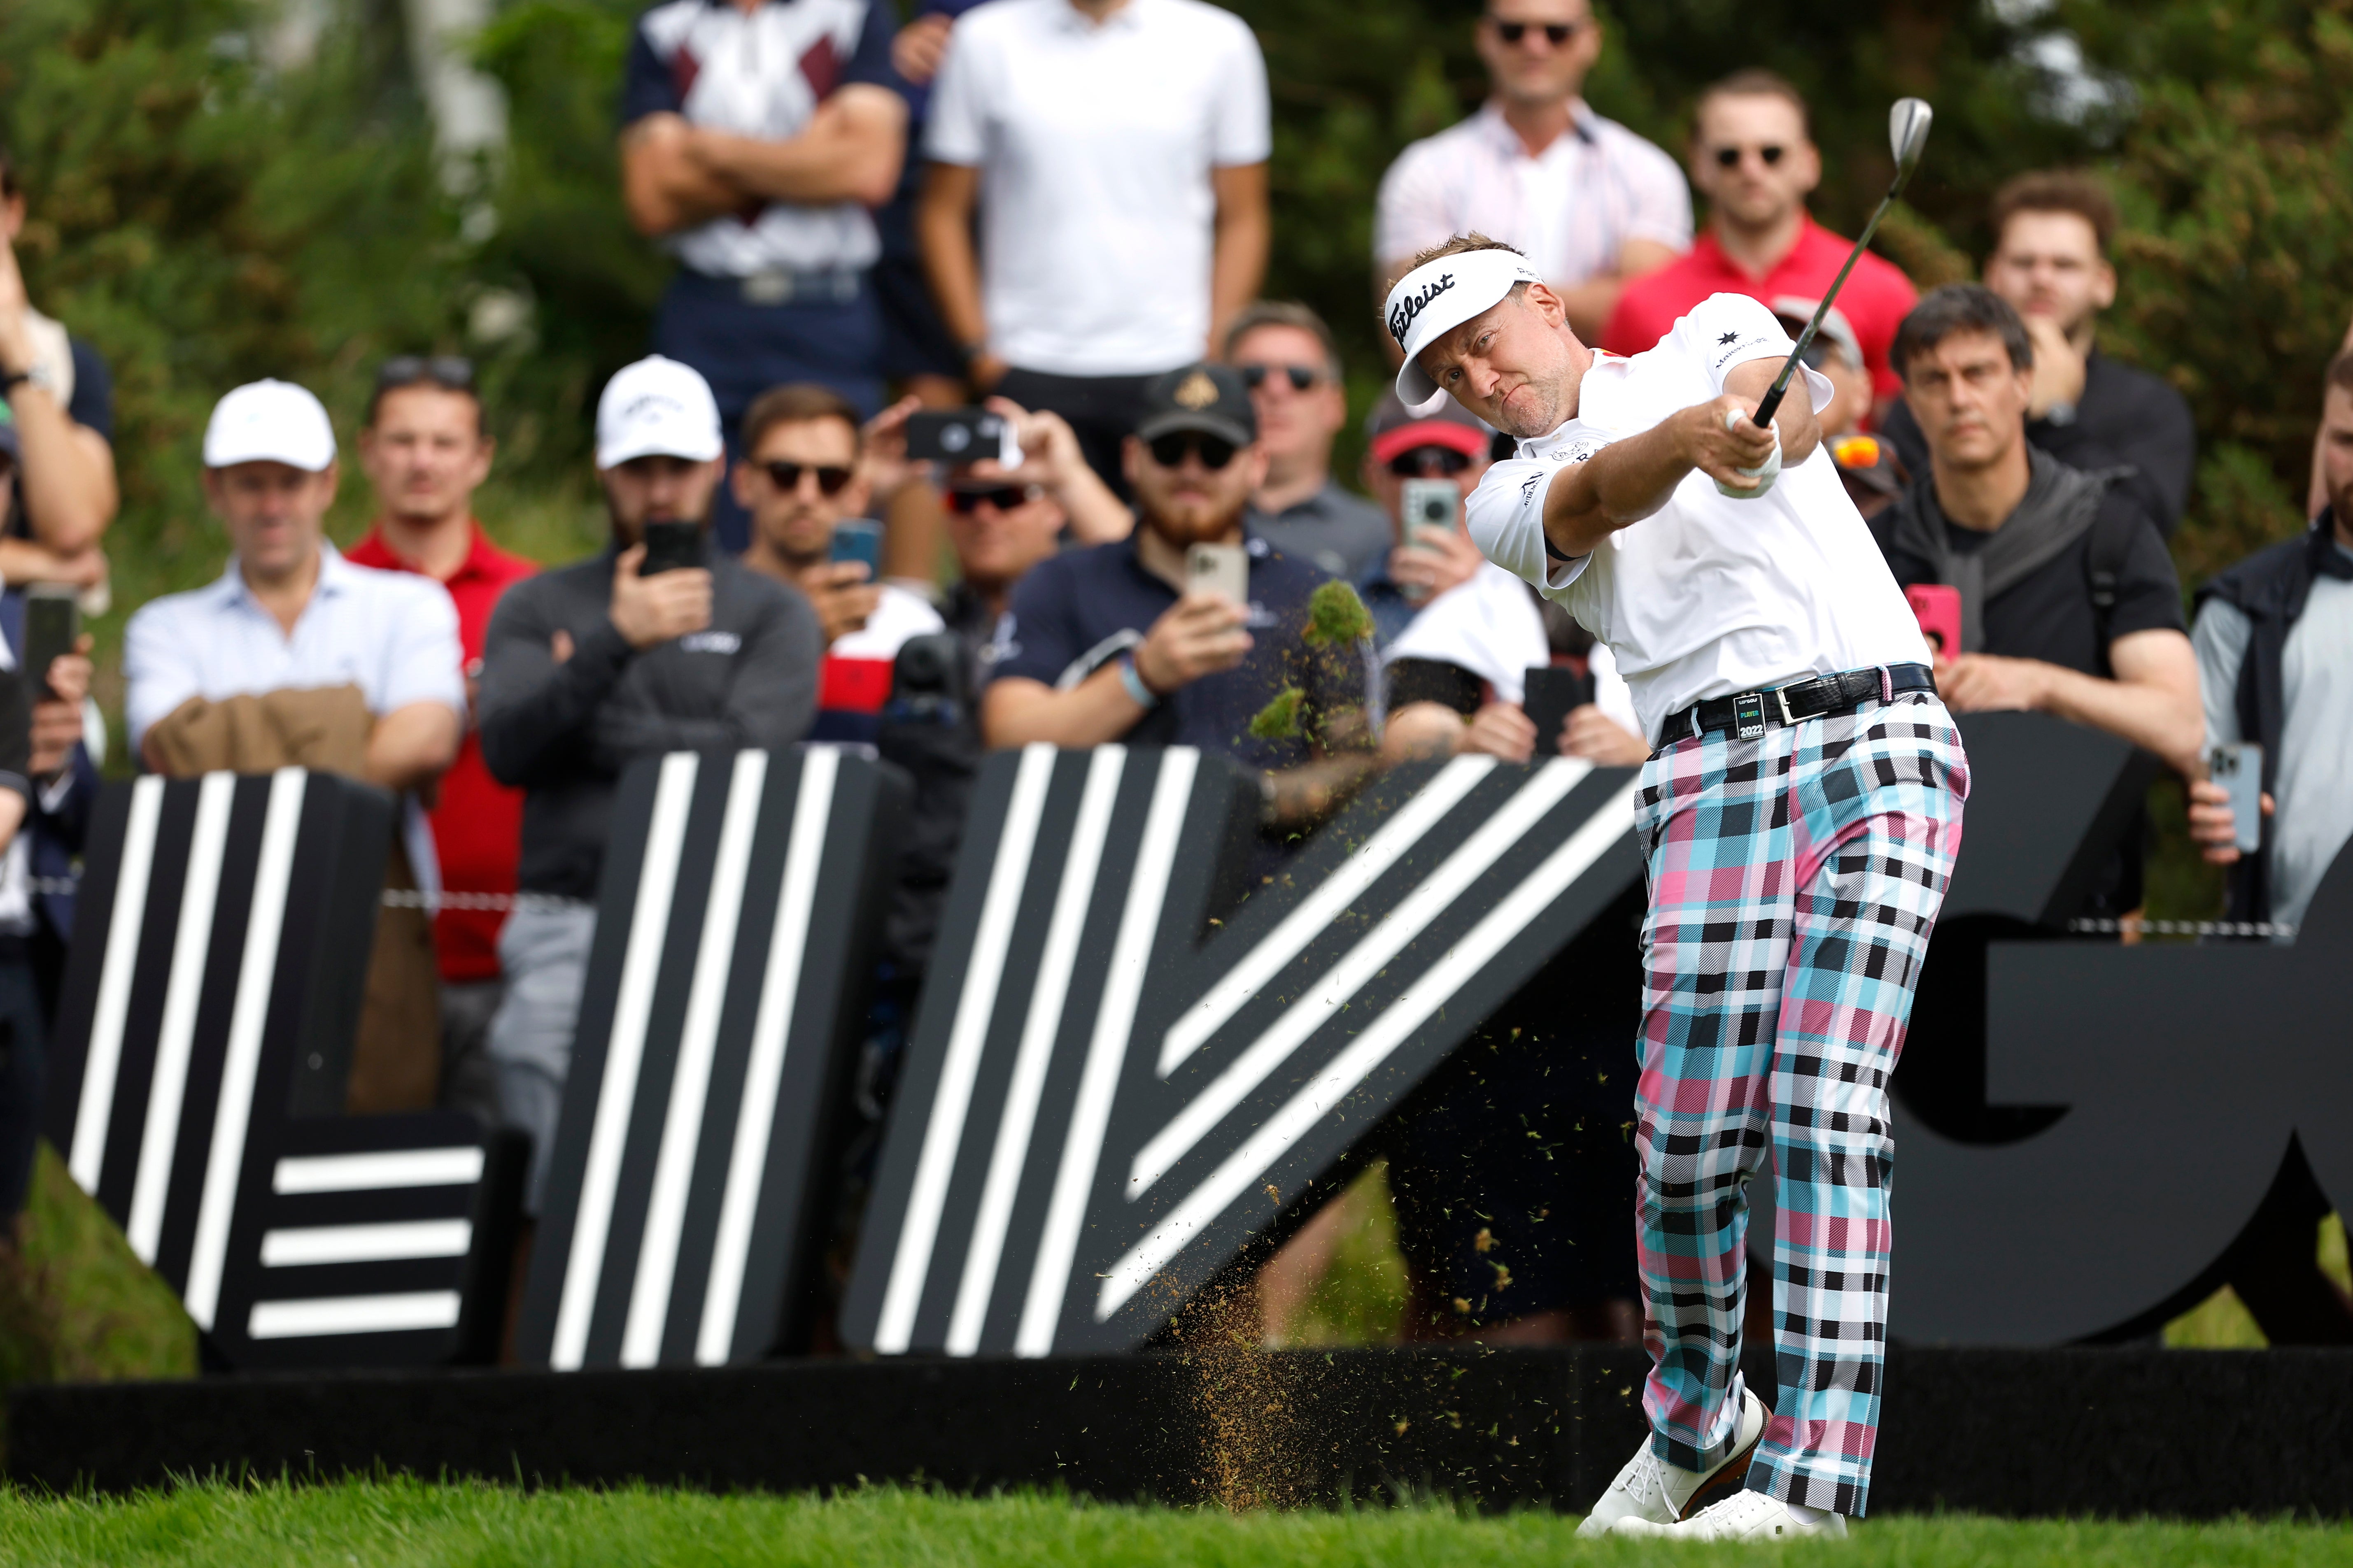 Ian Poulter plays in the inaugural LIV Golf event